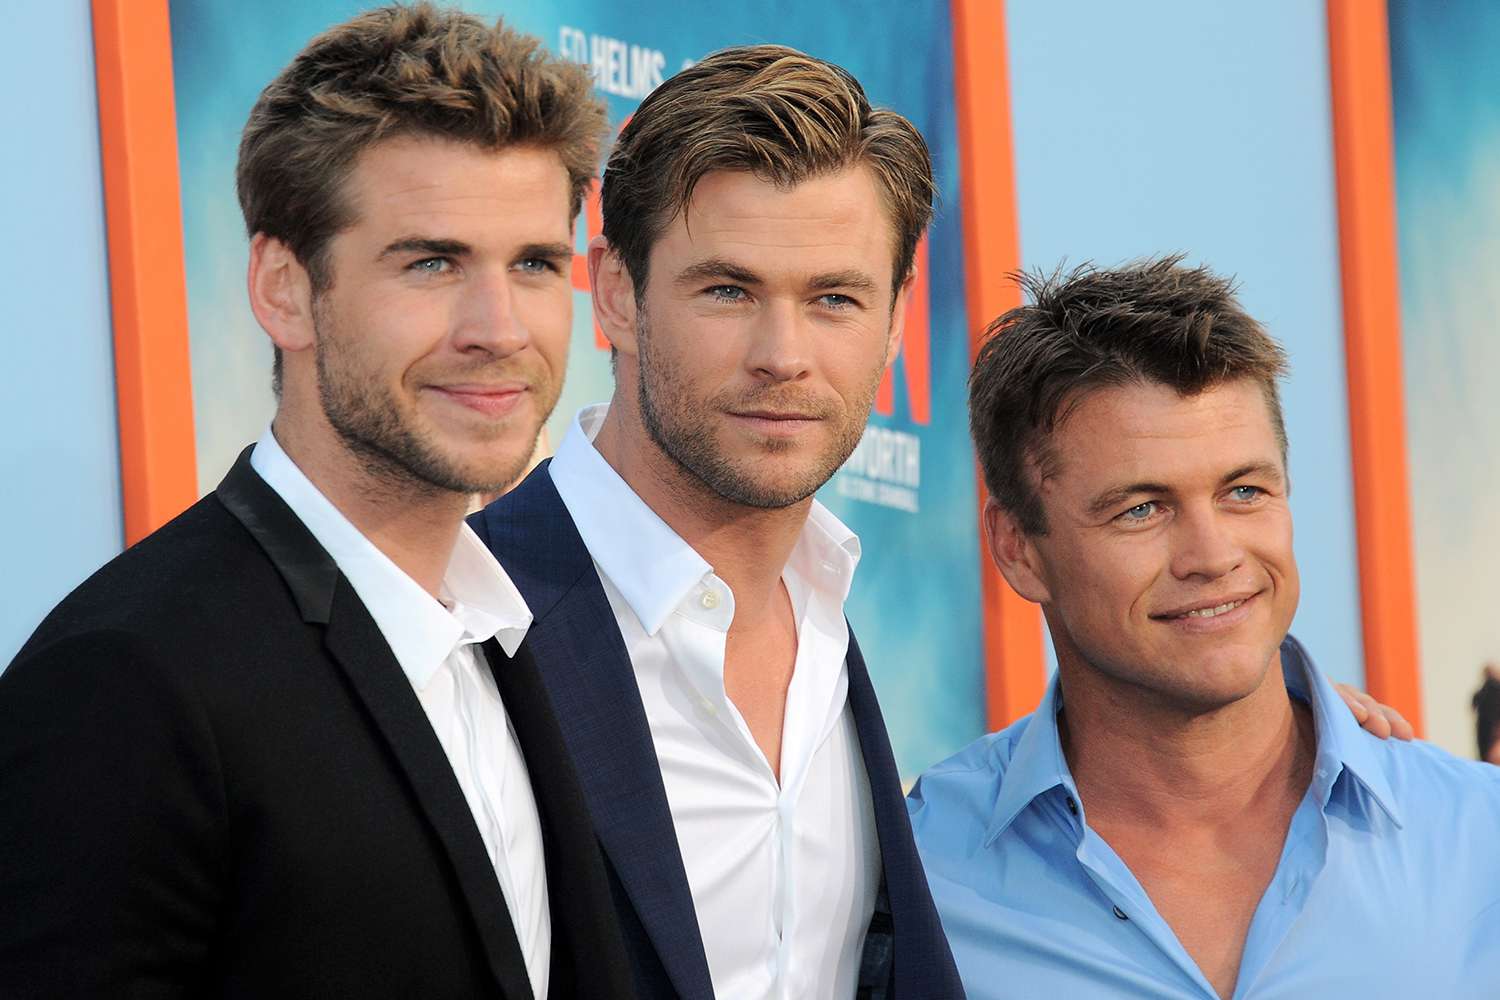 WESTWOOD, CA - JULY 27: Actors/brothers Liam Hemsworth, Luke Hemsworth and Chris Hemsworth arrive for the Premiere Of Warner Bros. Pictures' "Vacation" held at Regency Village Theatre on July 27, 2015 in Westwood, California. (Photo by Albert L. Ortega/Getty Images)